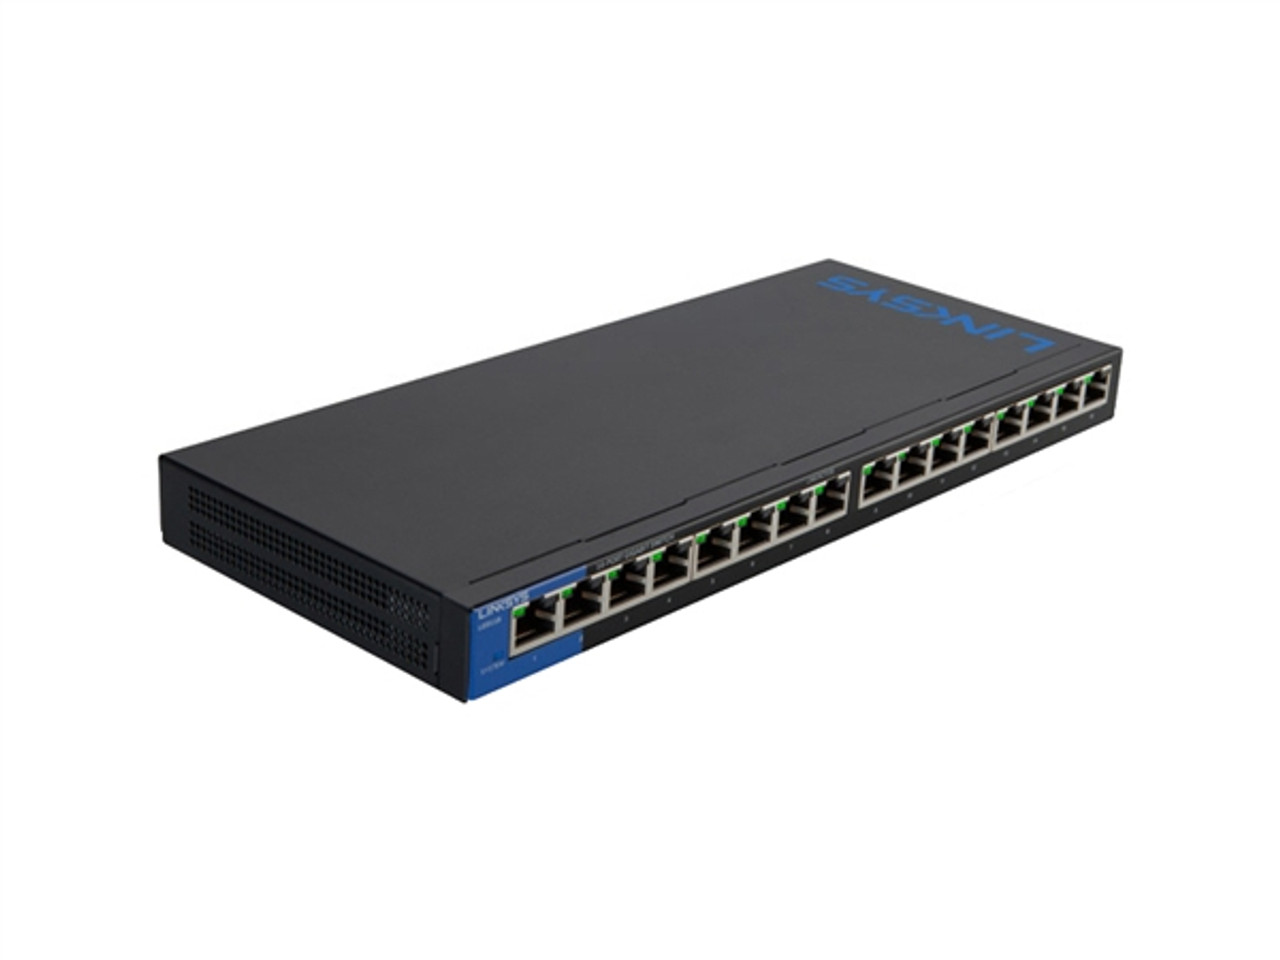 PoE Switch // Comprehensive Buyer's Guide to PoE Switches